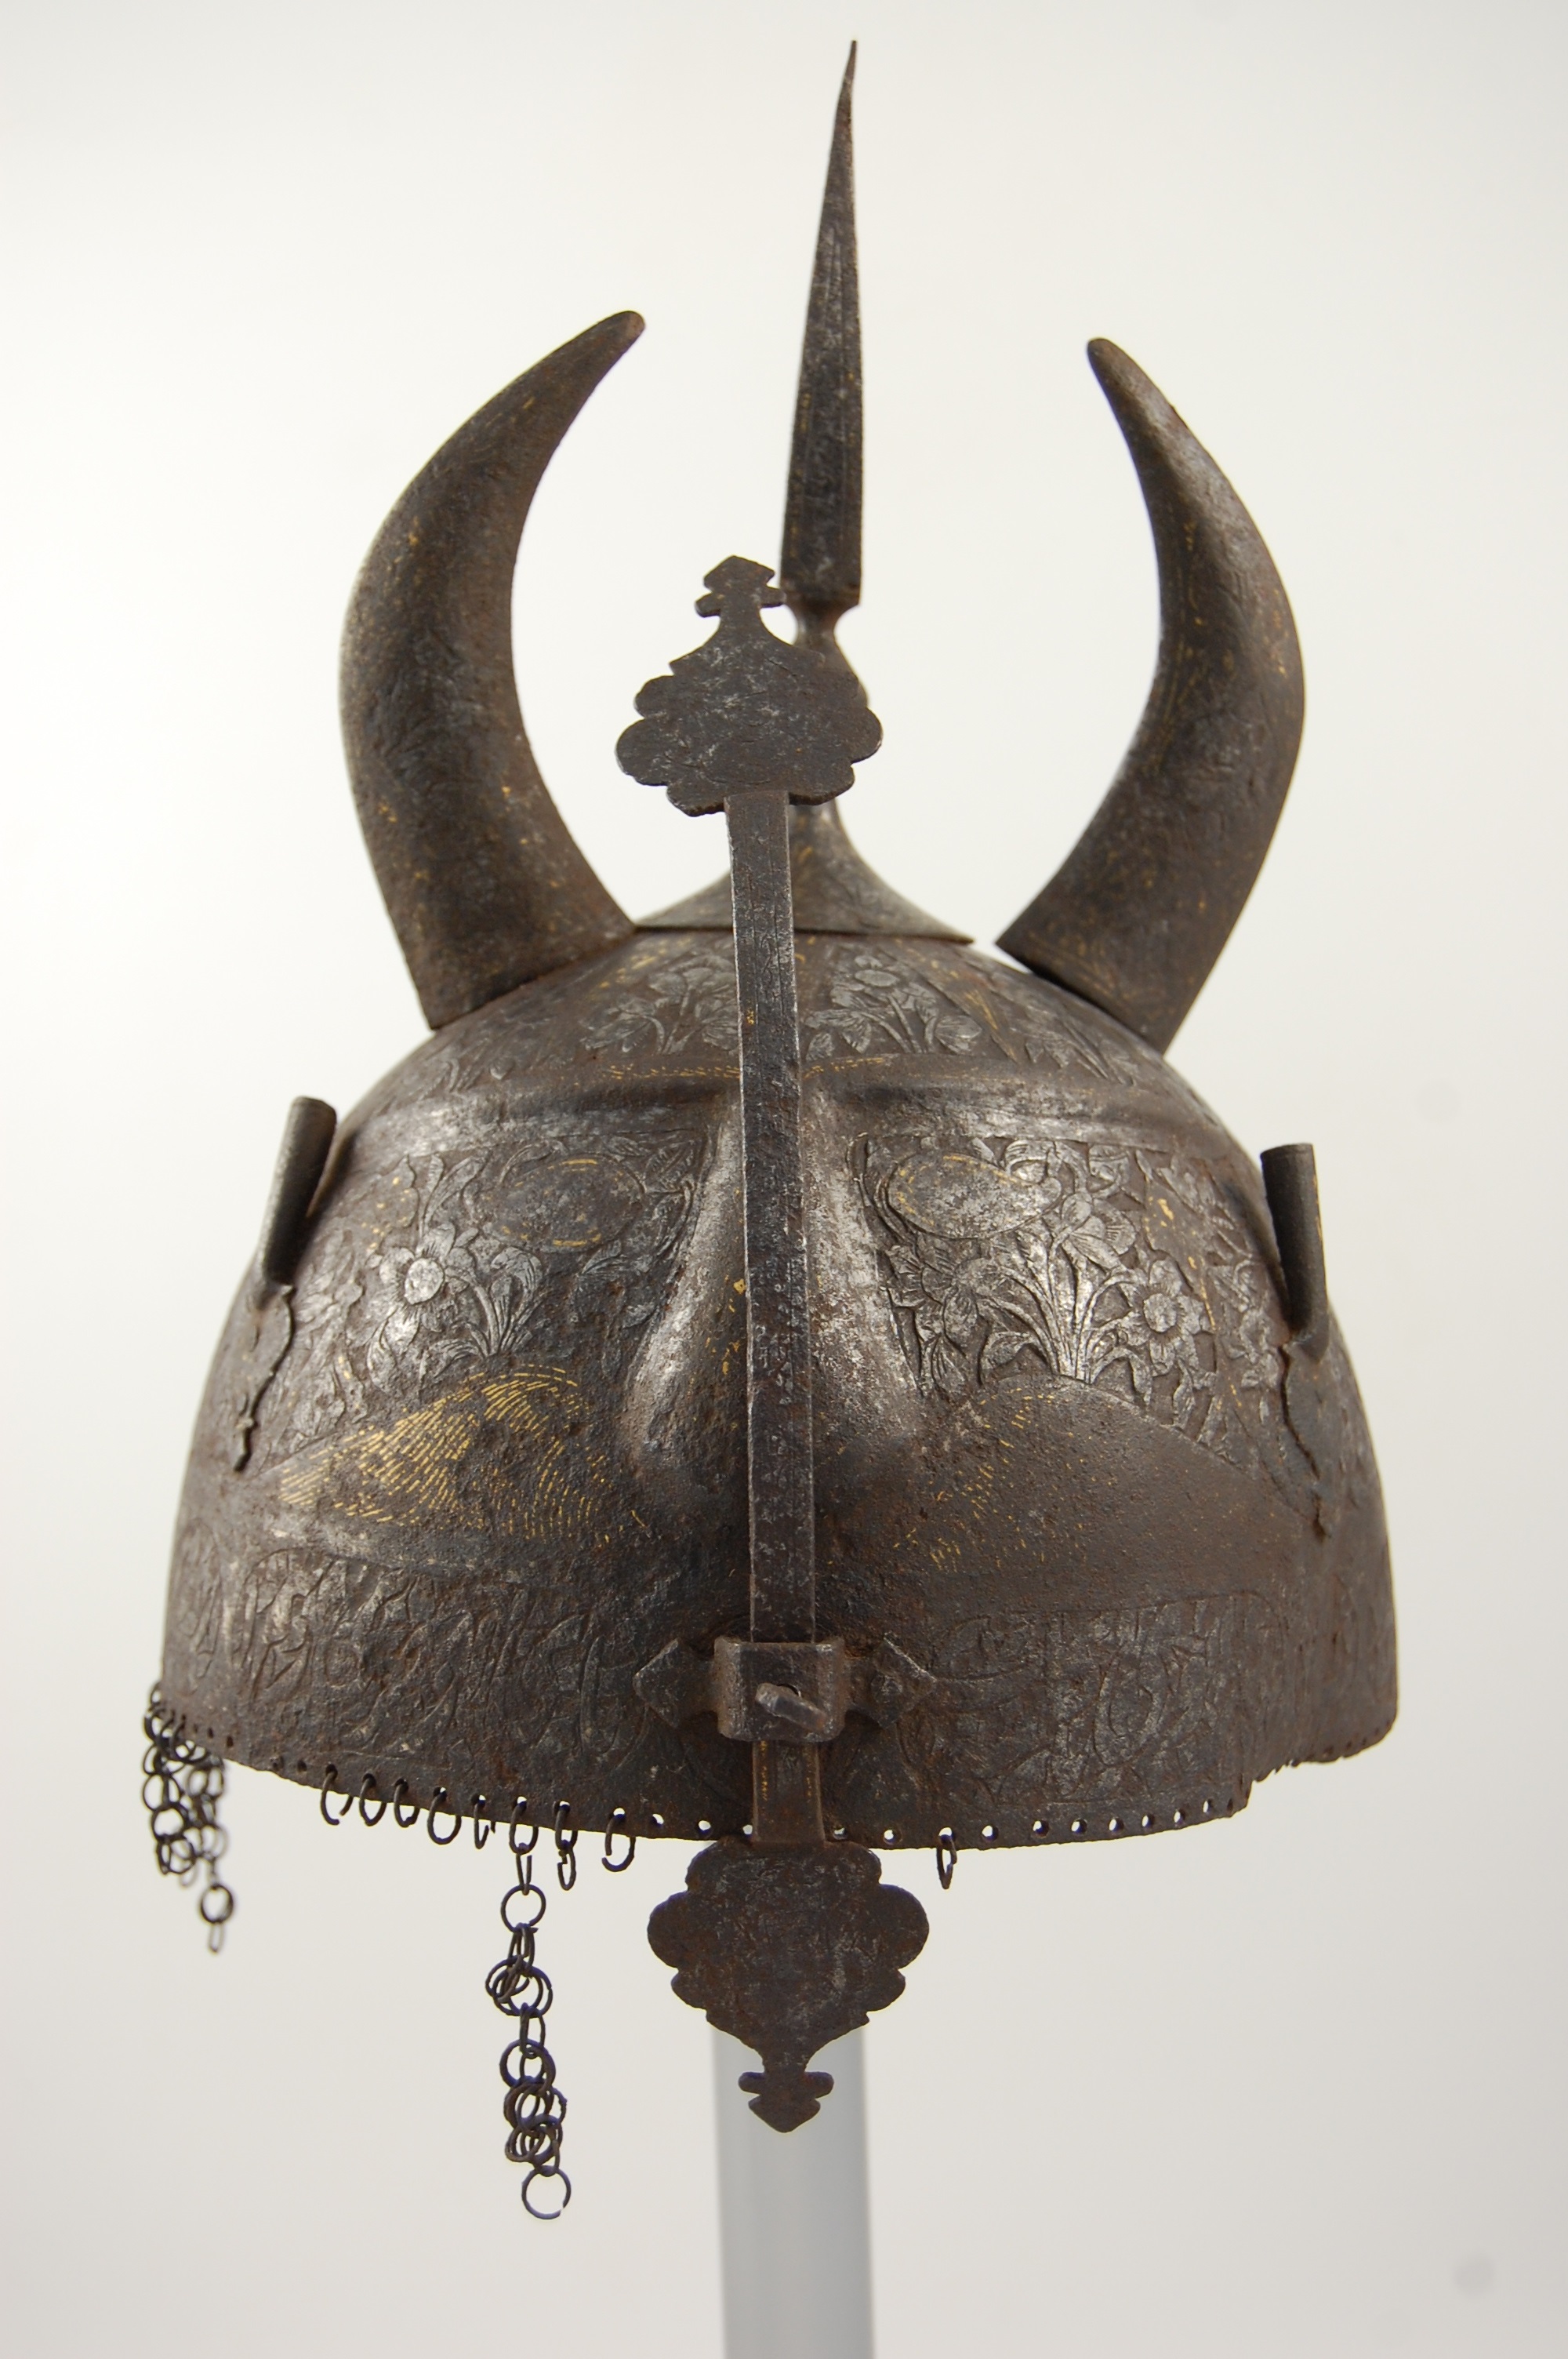 A helmet worn by Persian Empire soldiers in the 18th or 19th century